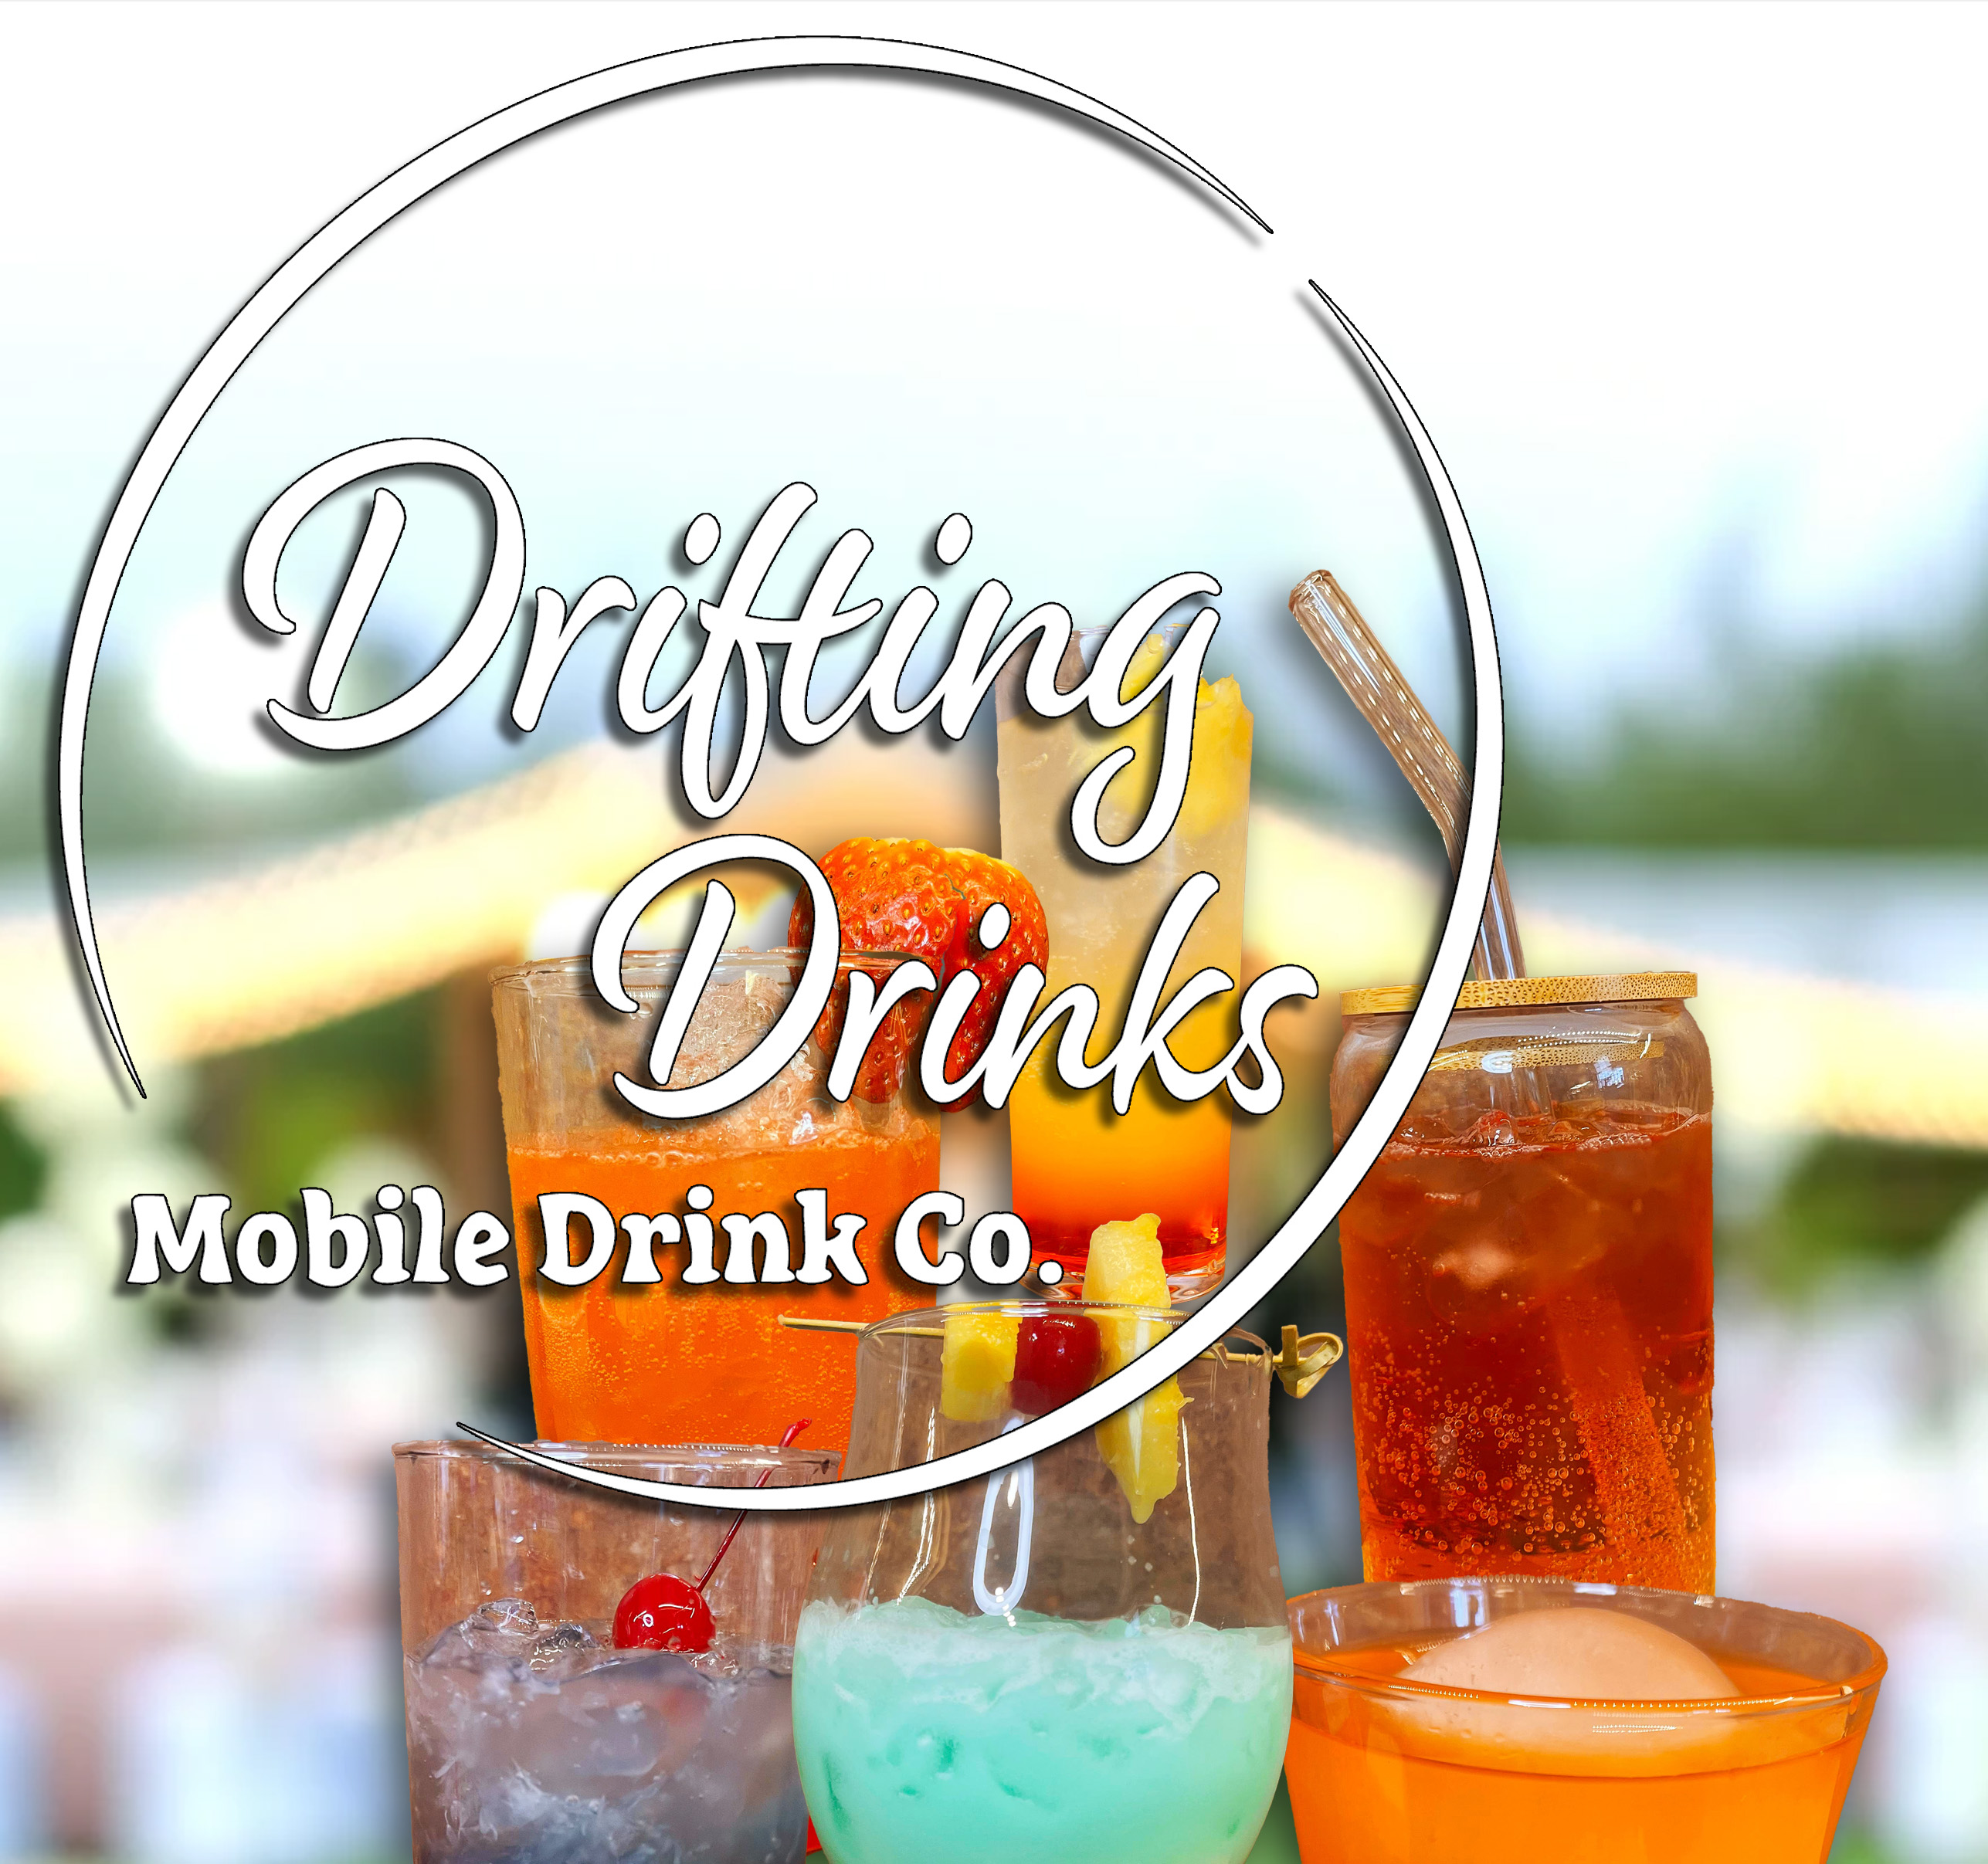 Drifting Drinks Mobile Drink Co.